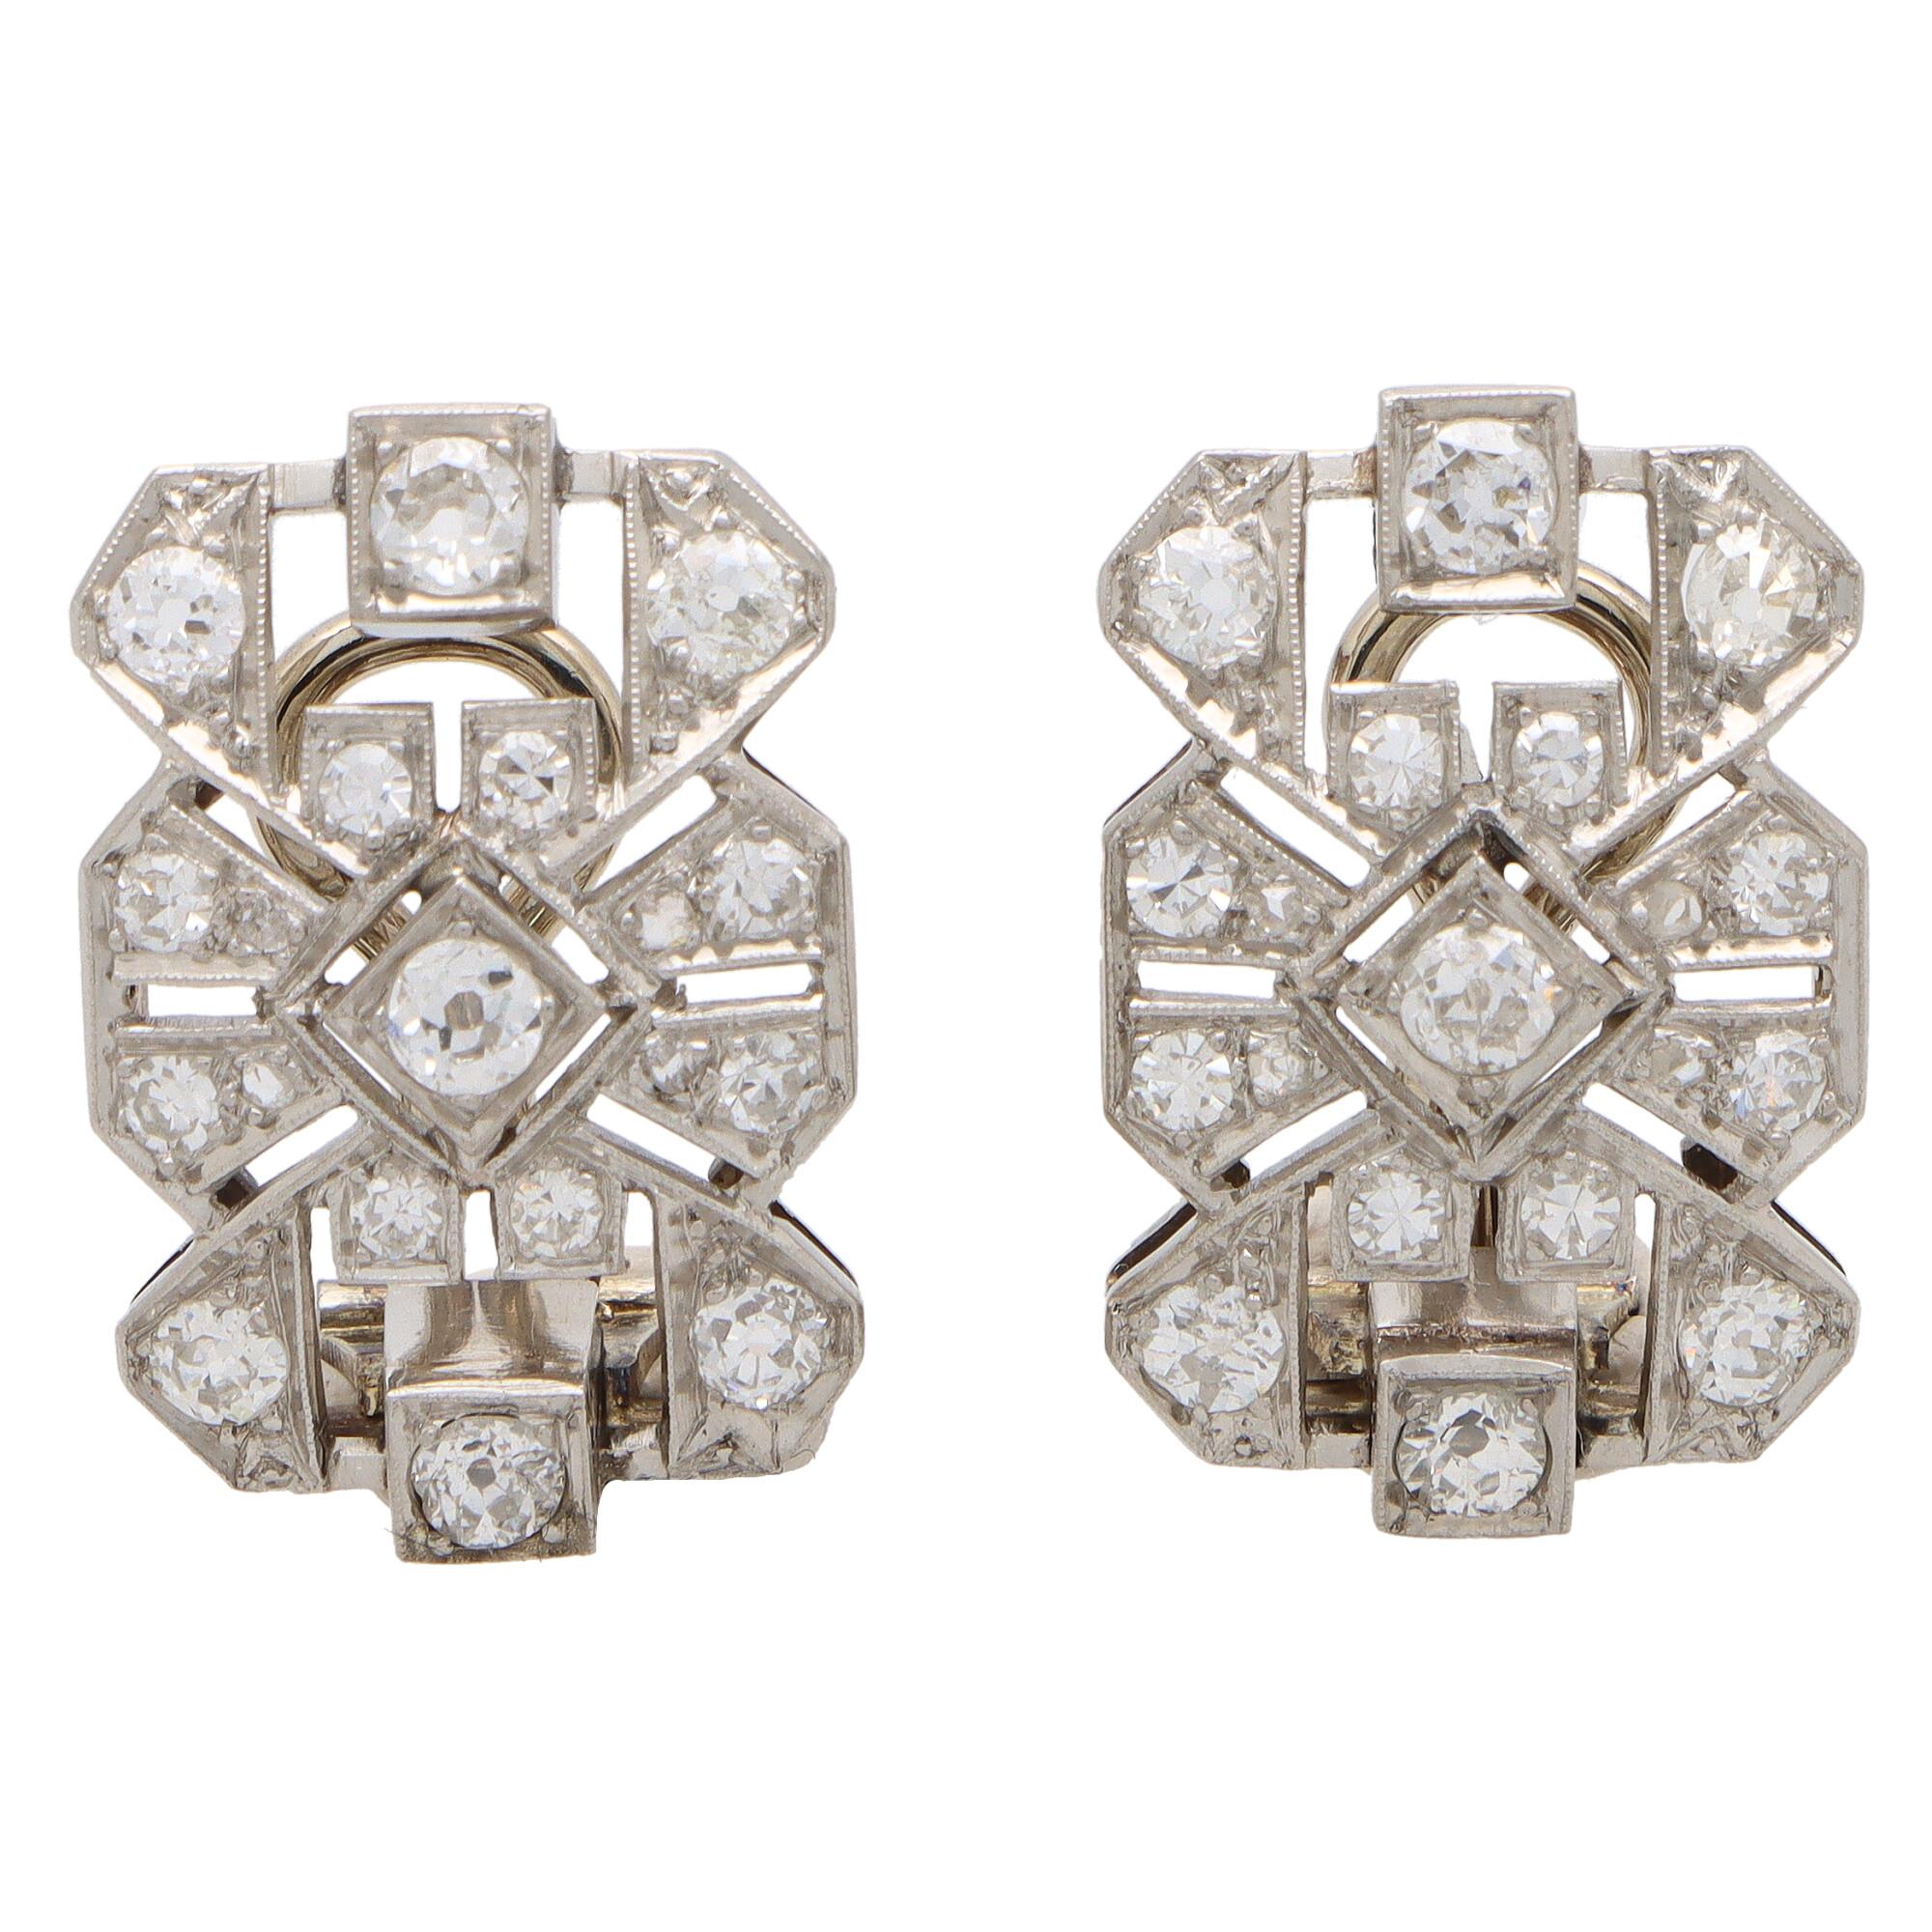 Old Mine Cut Late Art Deco Diamond Panel Earrings Set in Platinum and 18k White Gold